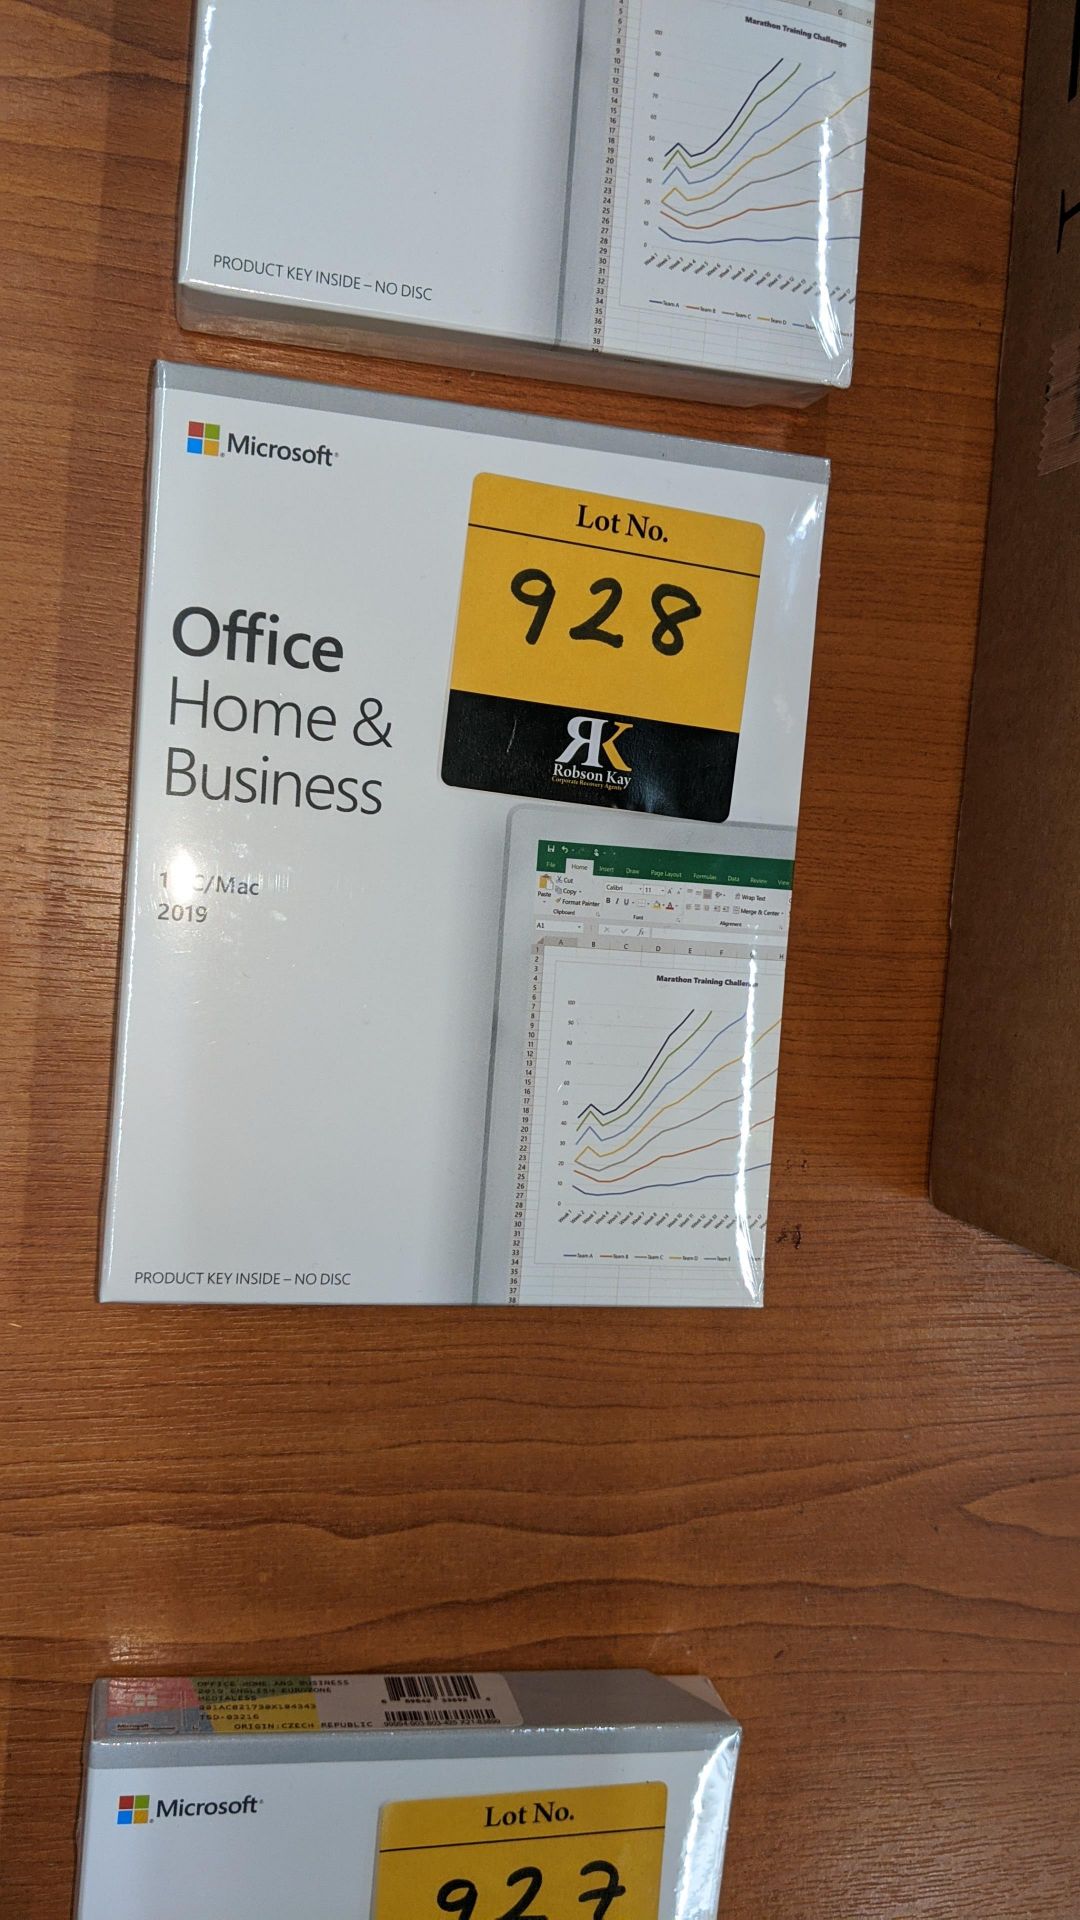 Microsoft Office Home & Business 2019 for PC/MAC. This lot comprises a sealed box with licence